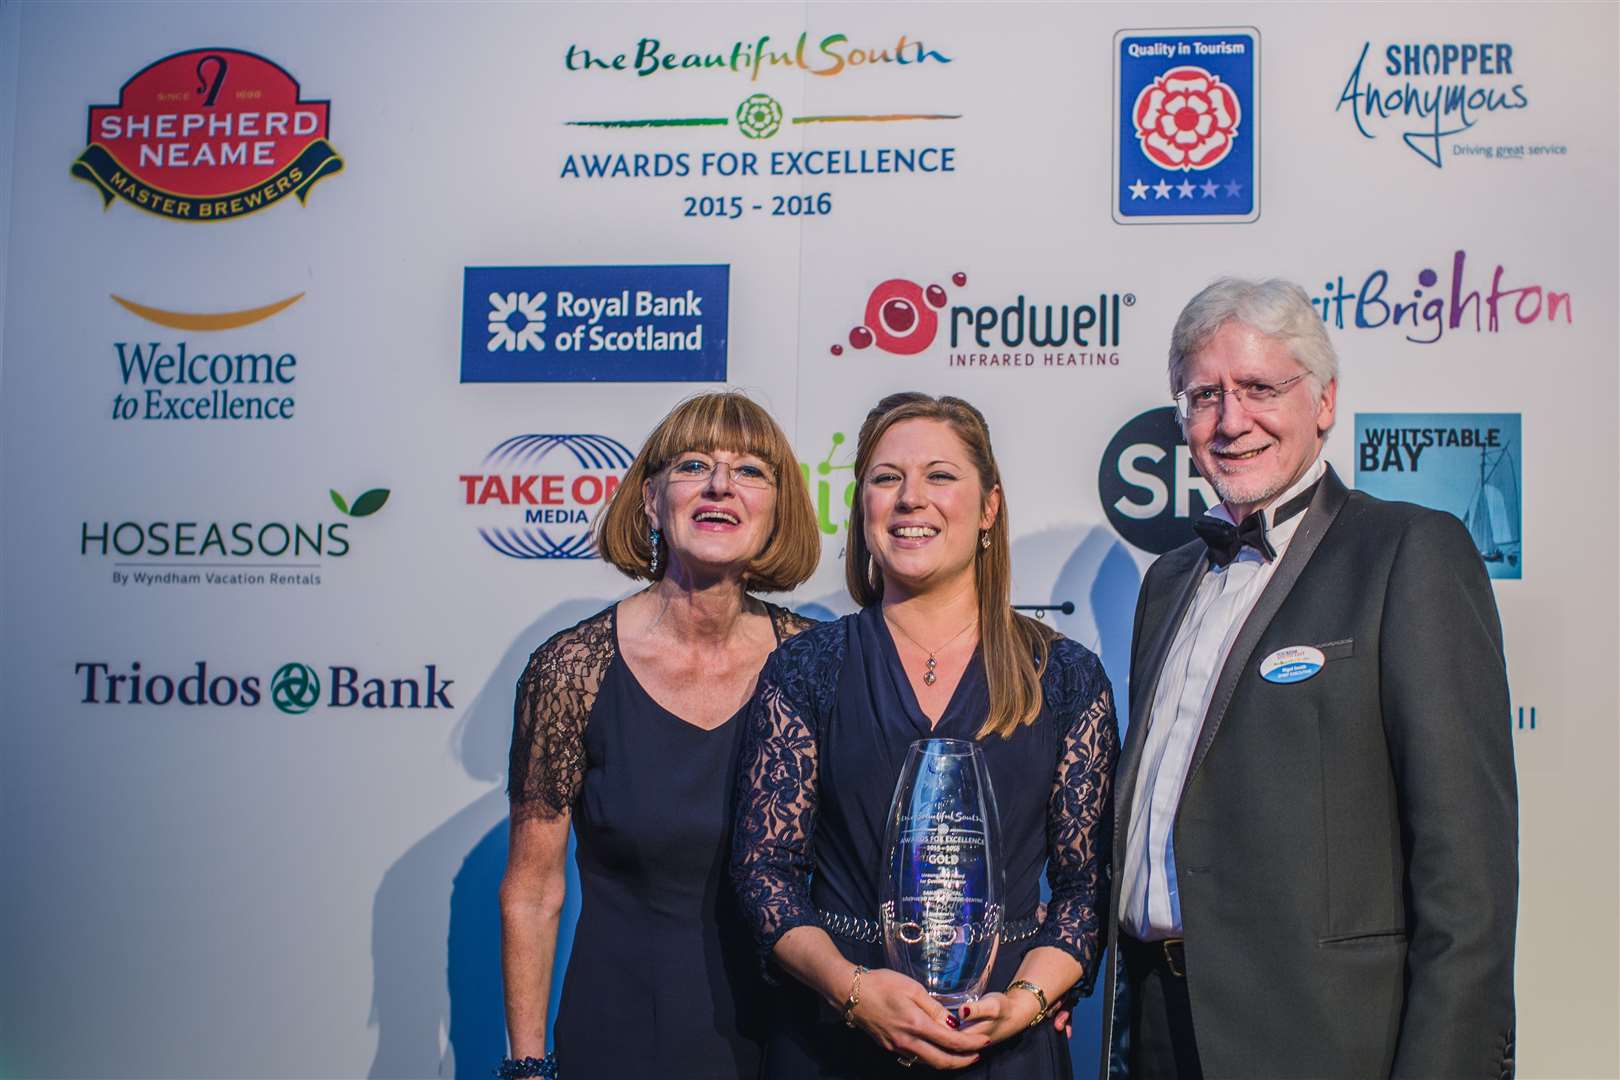 Samantha Jeal, centre, is presented with her award by Sue Gill, training director of Welcome to Excellence, and Nigel Collins, chief executive of Tourism South East